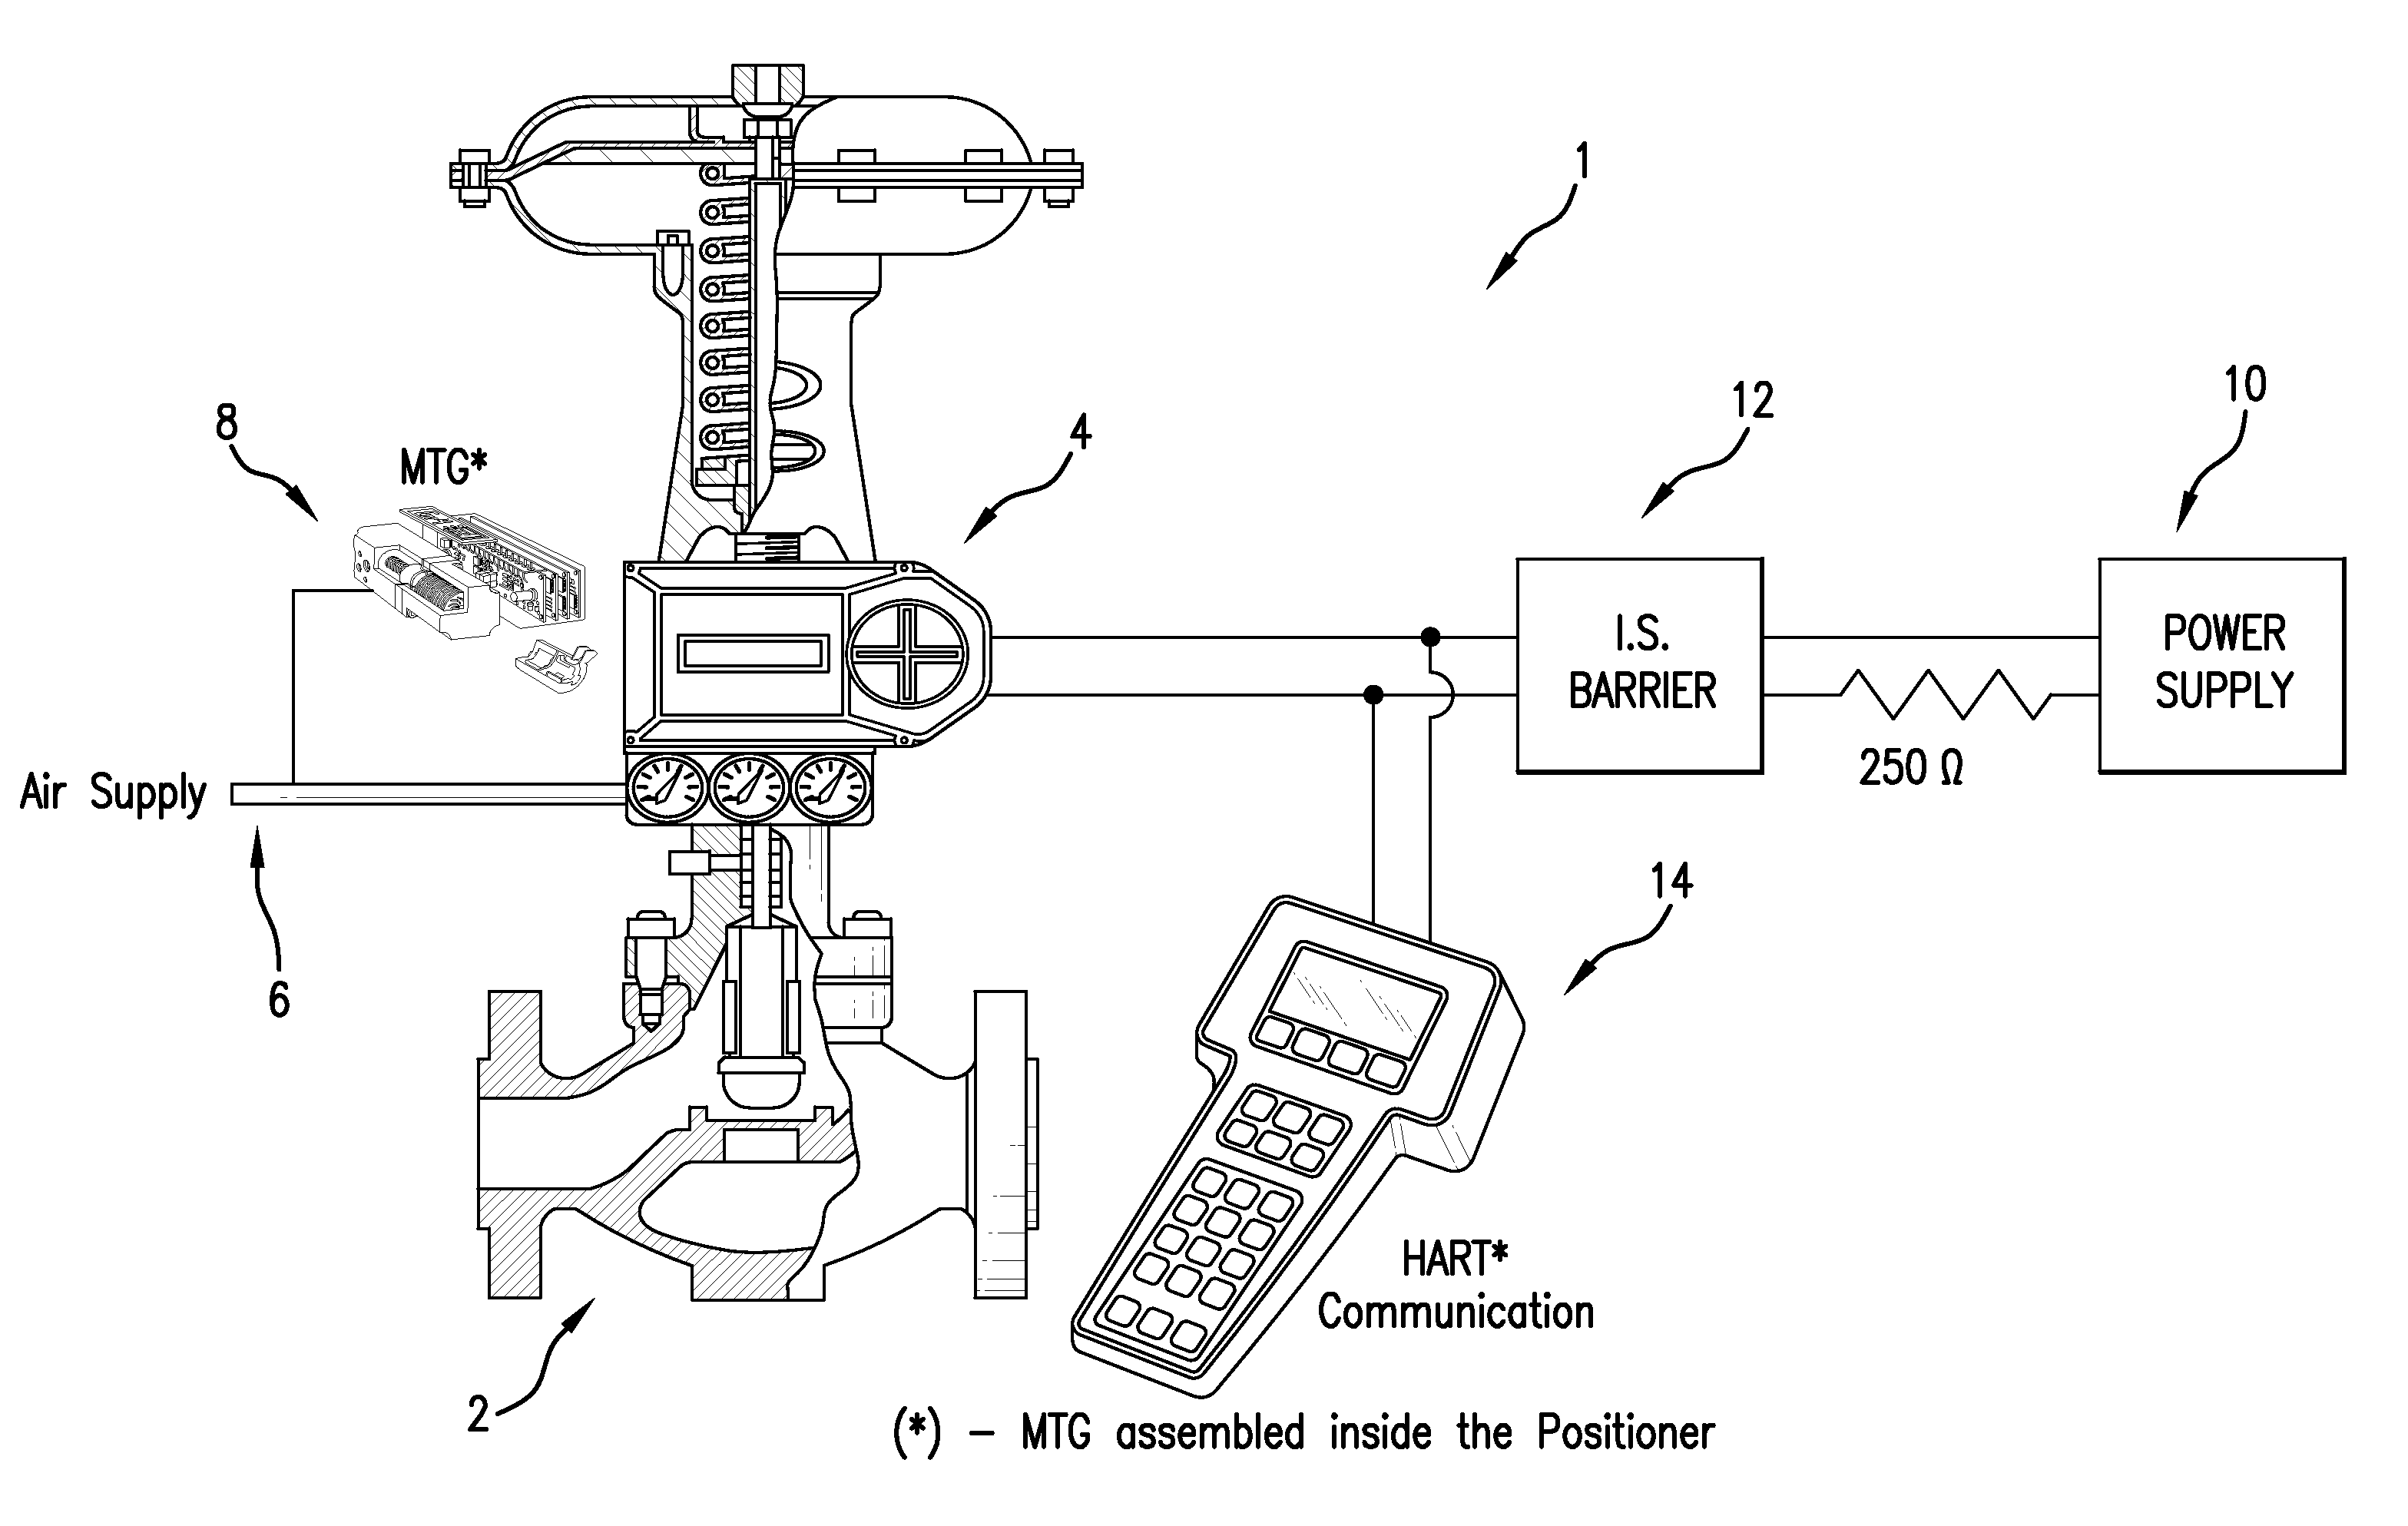 Micro-power generator for valve control applications